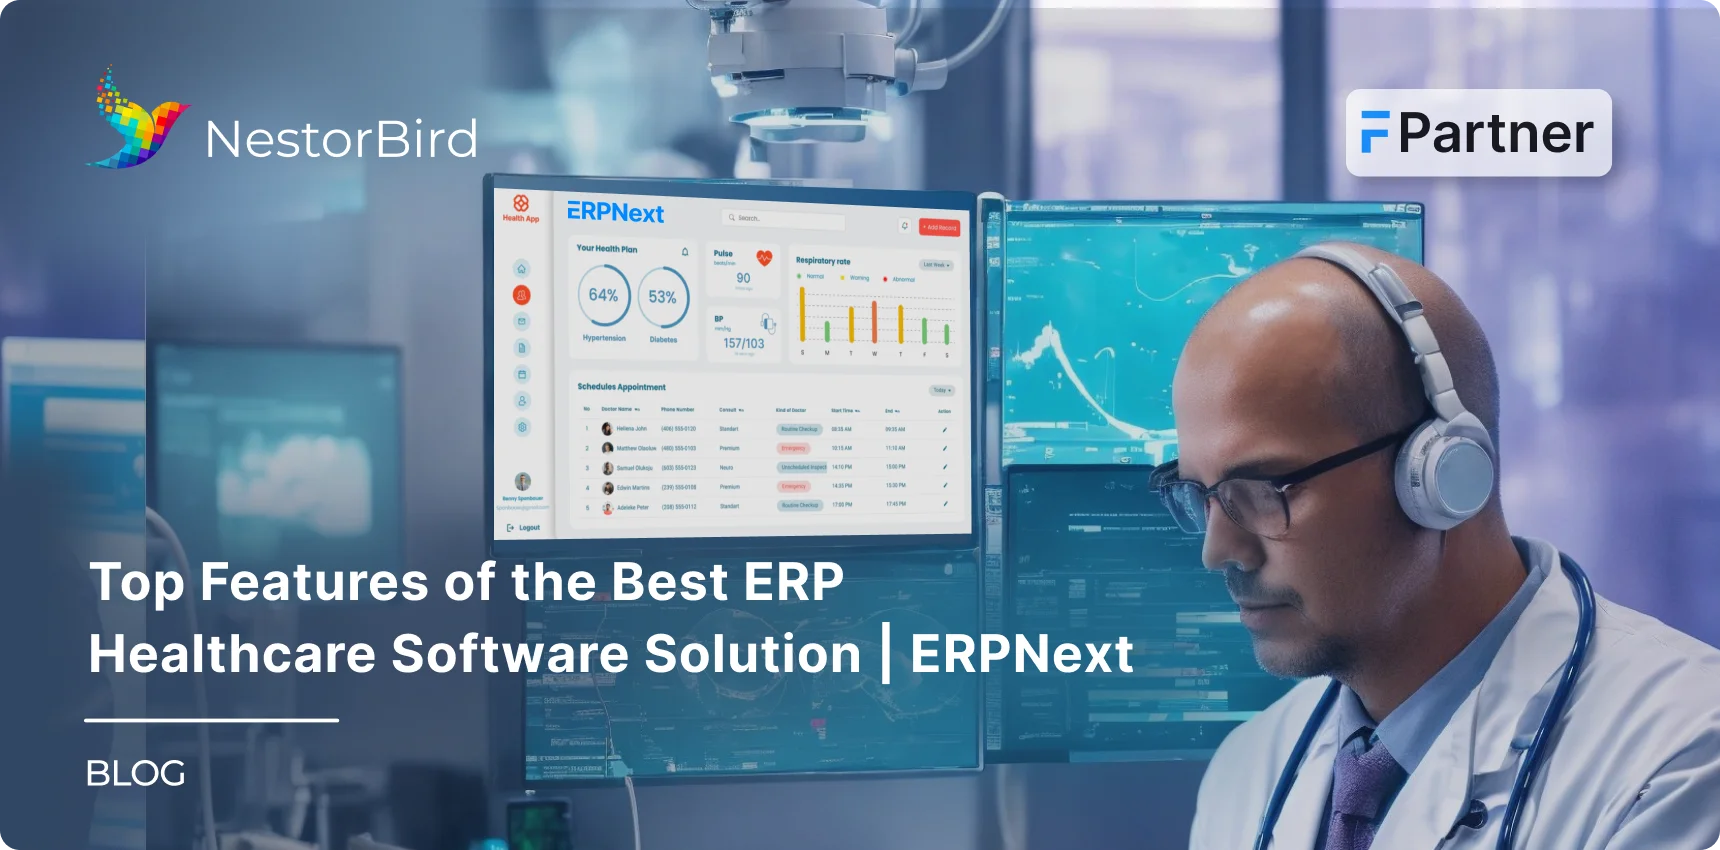 Top Features of the Best ERP Healthcare Software Solution | ERPNext